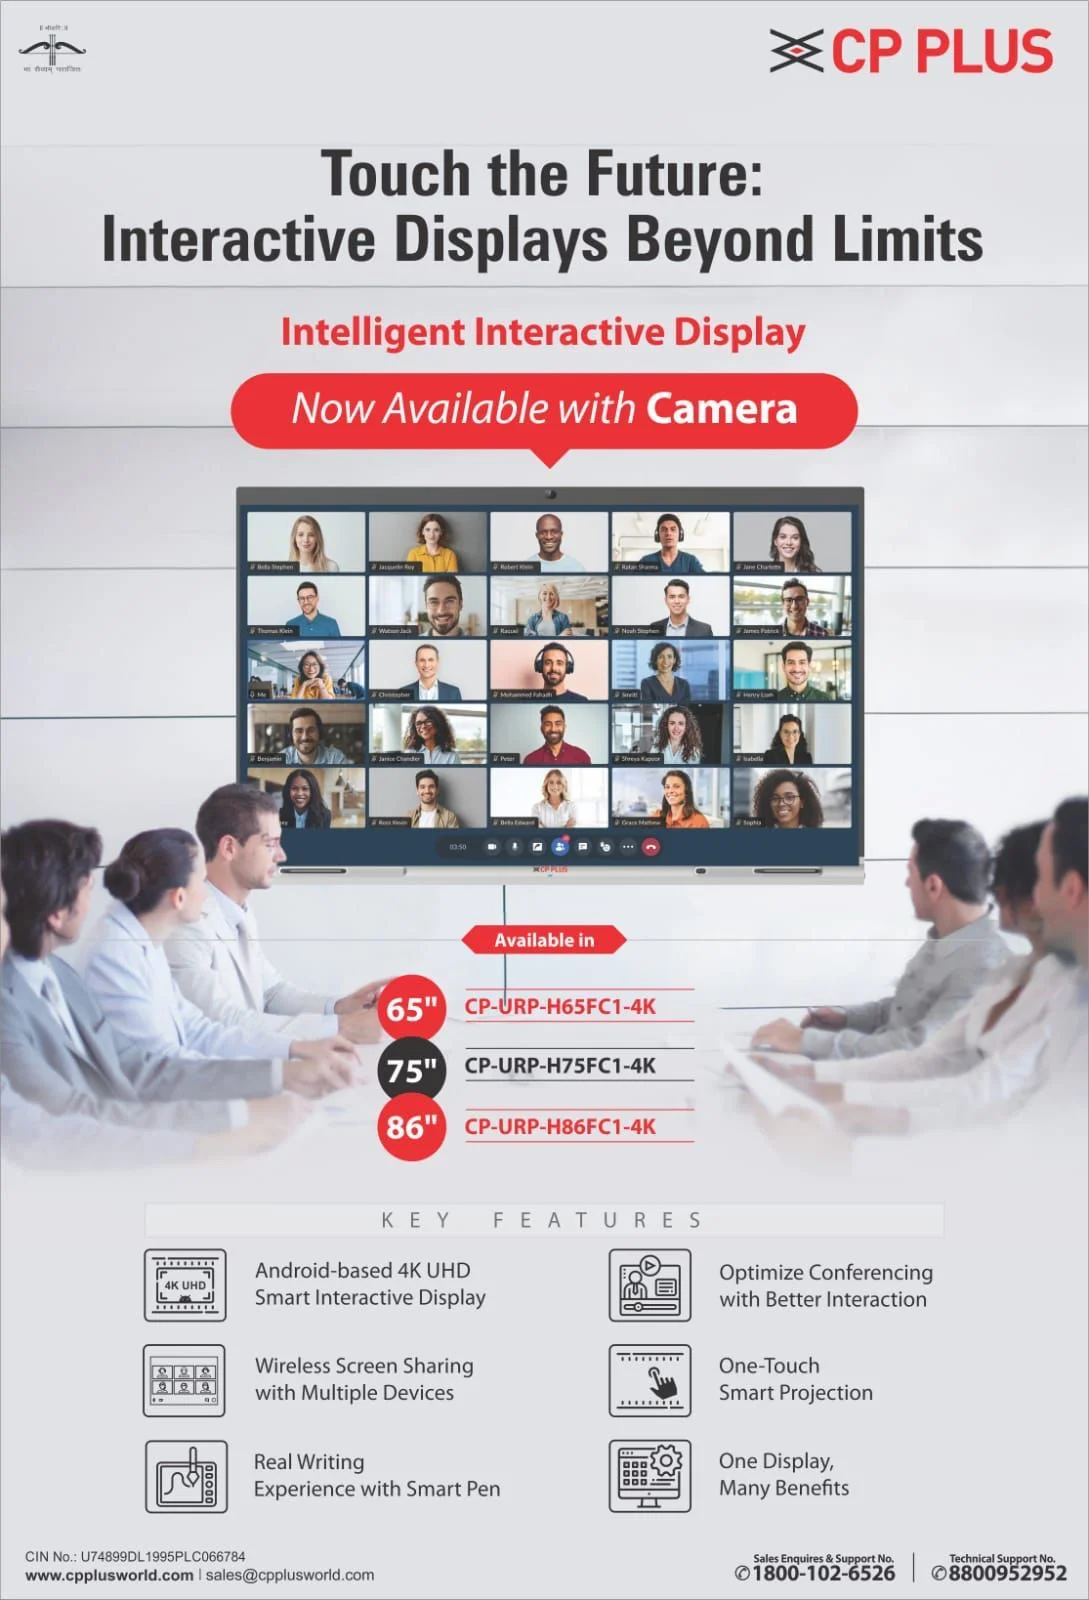 Intelligent Interactive Display now available with Camera